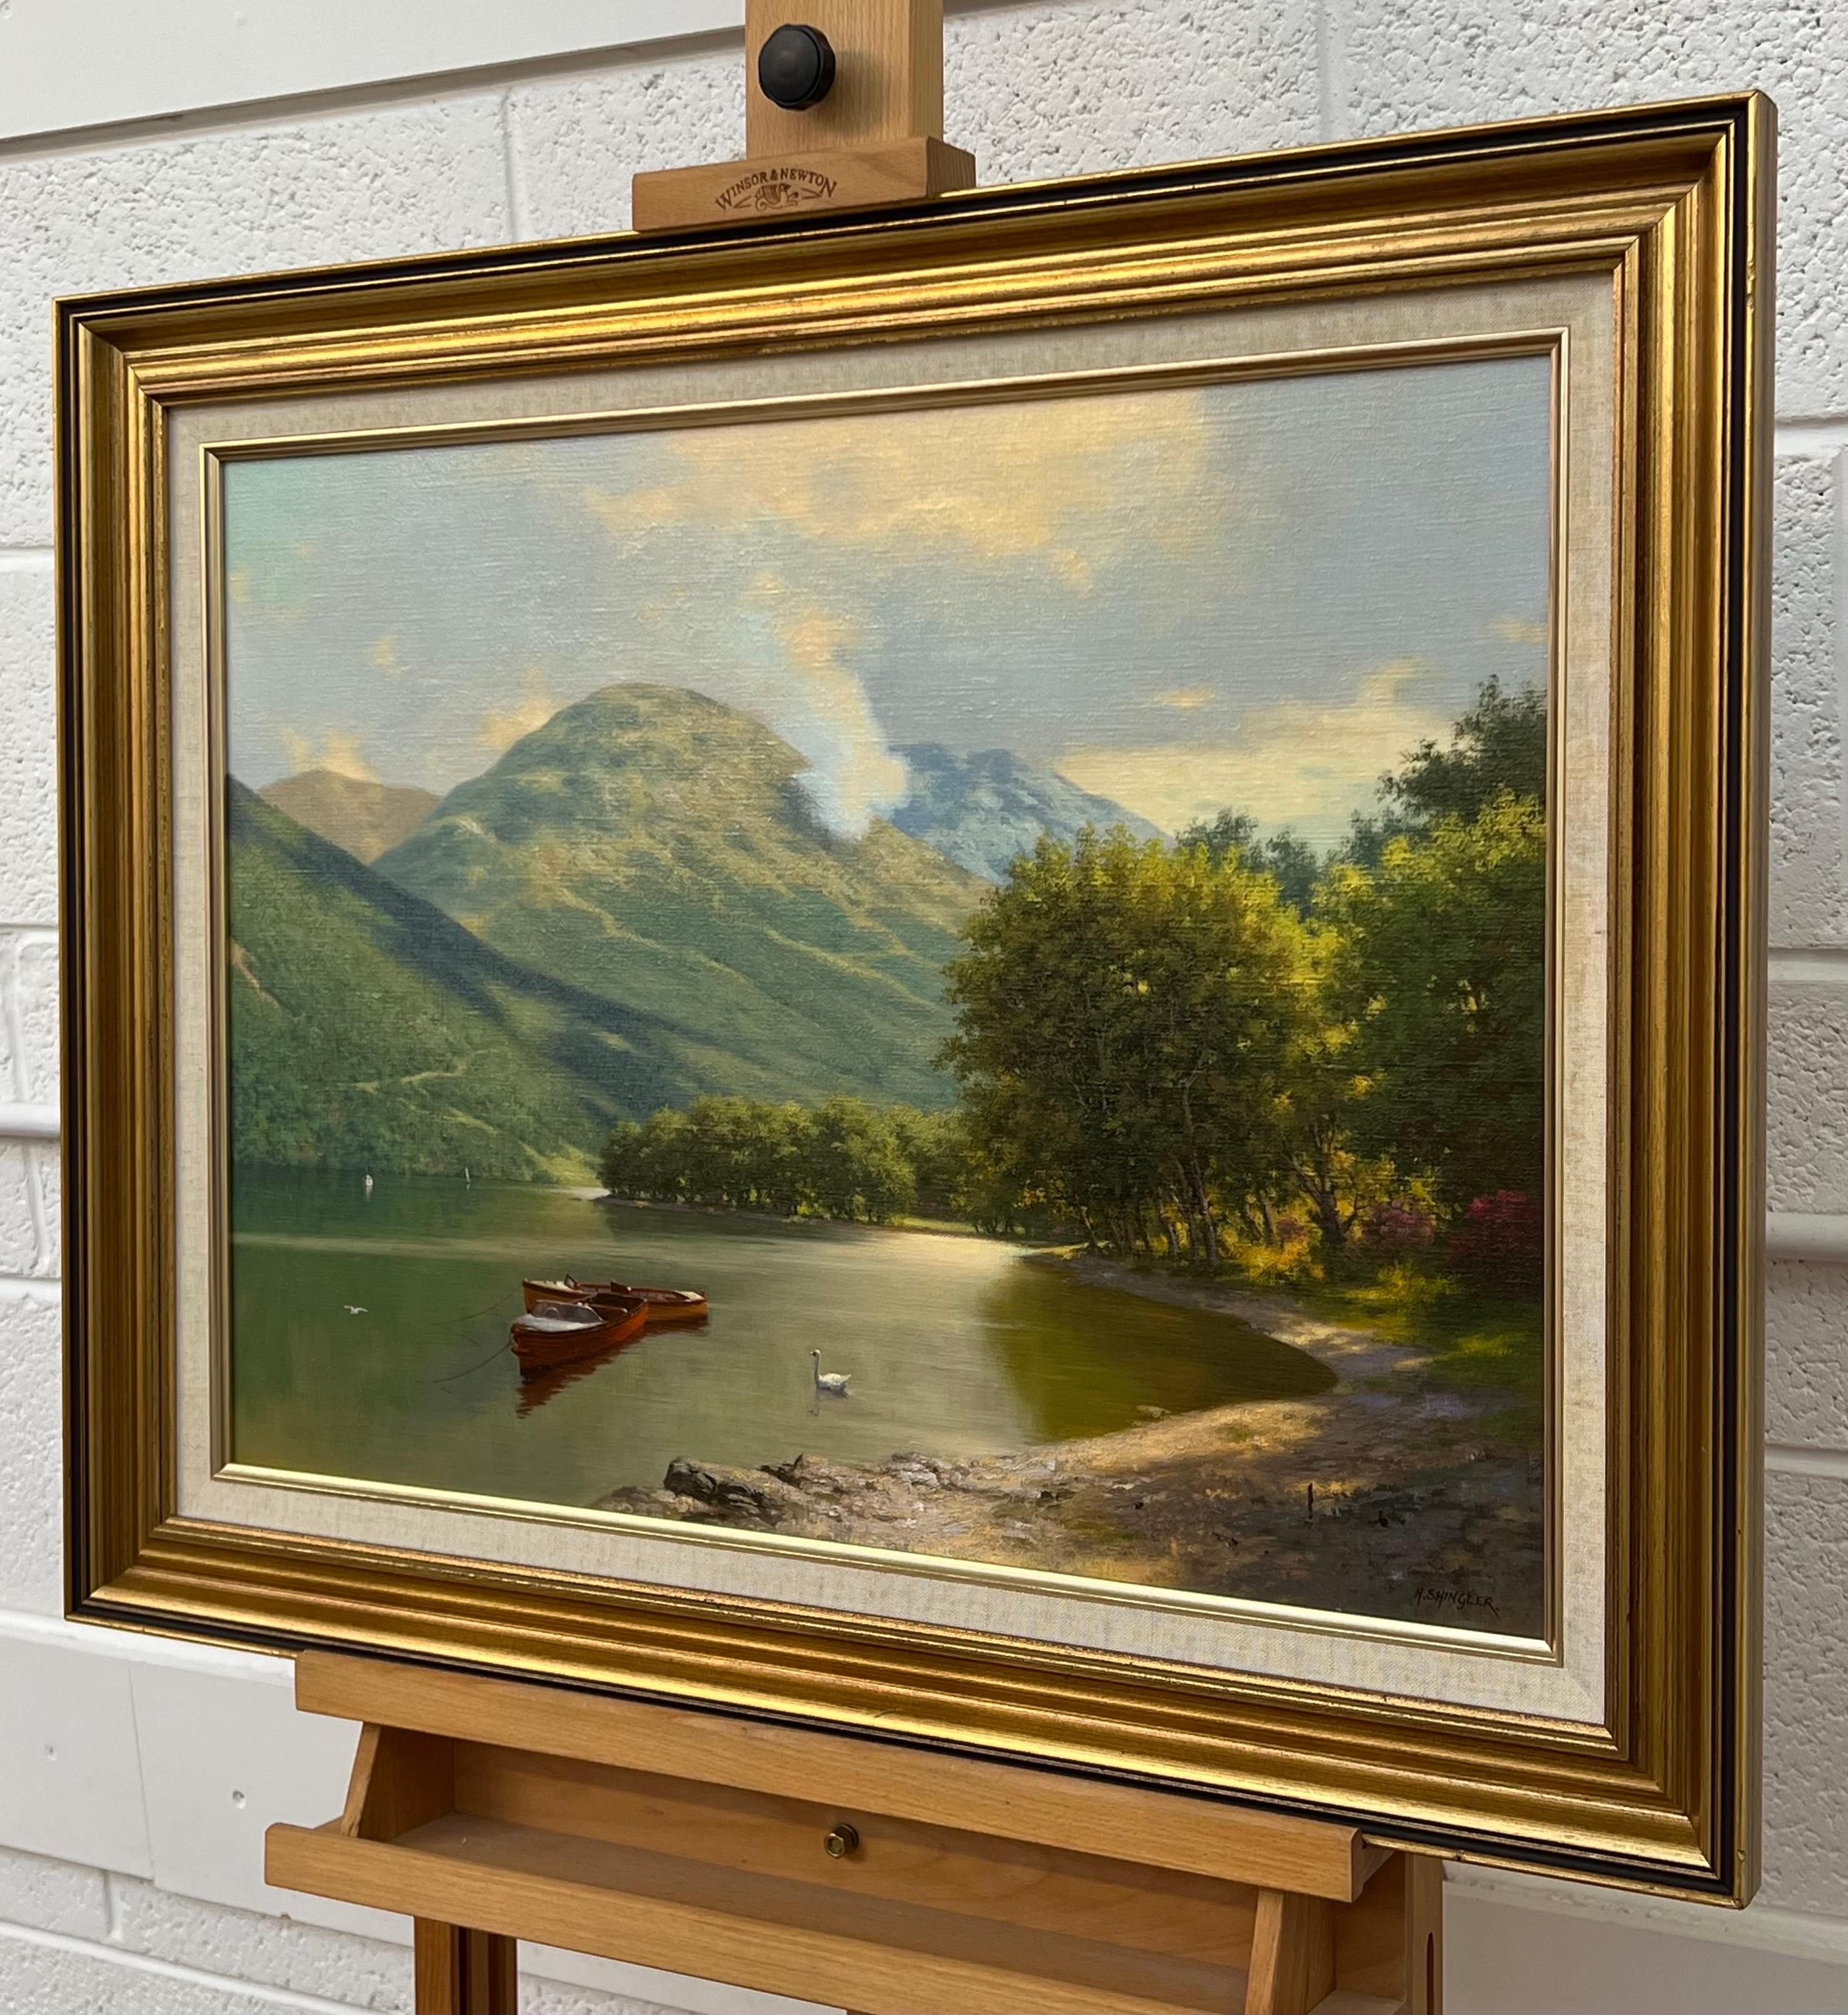 Tranquil Lake Scene with Boats & Swan in the Mountains of the Scottish Highlands - Realist Painting by Howard Shingler